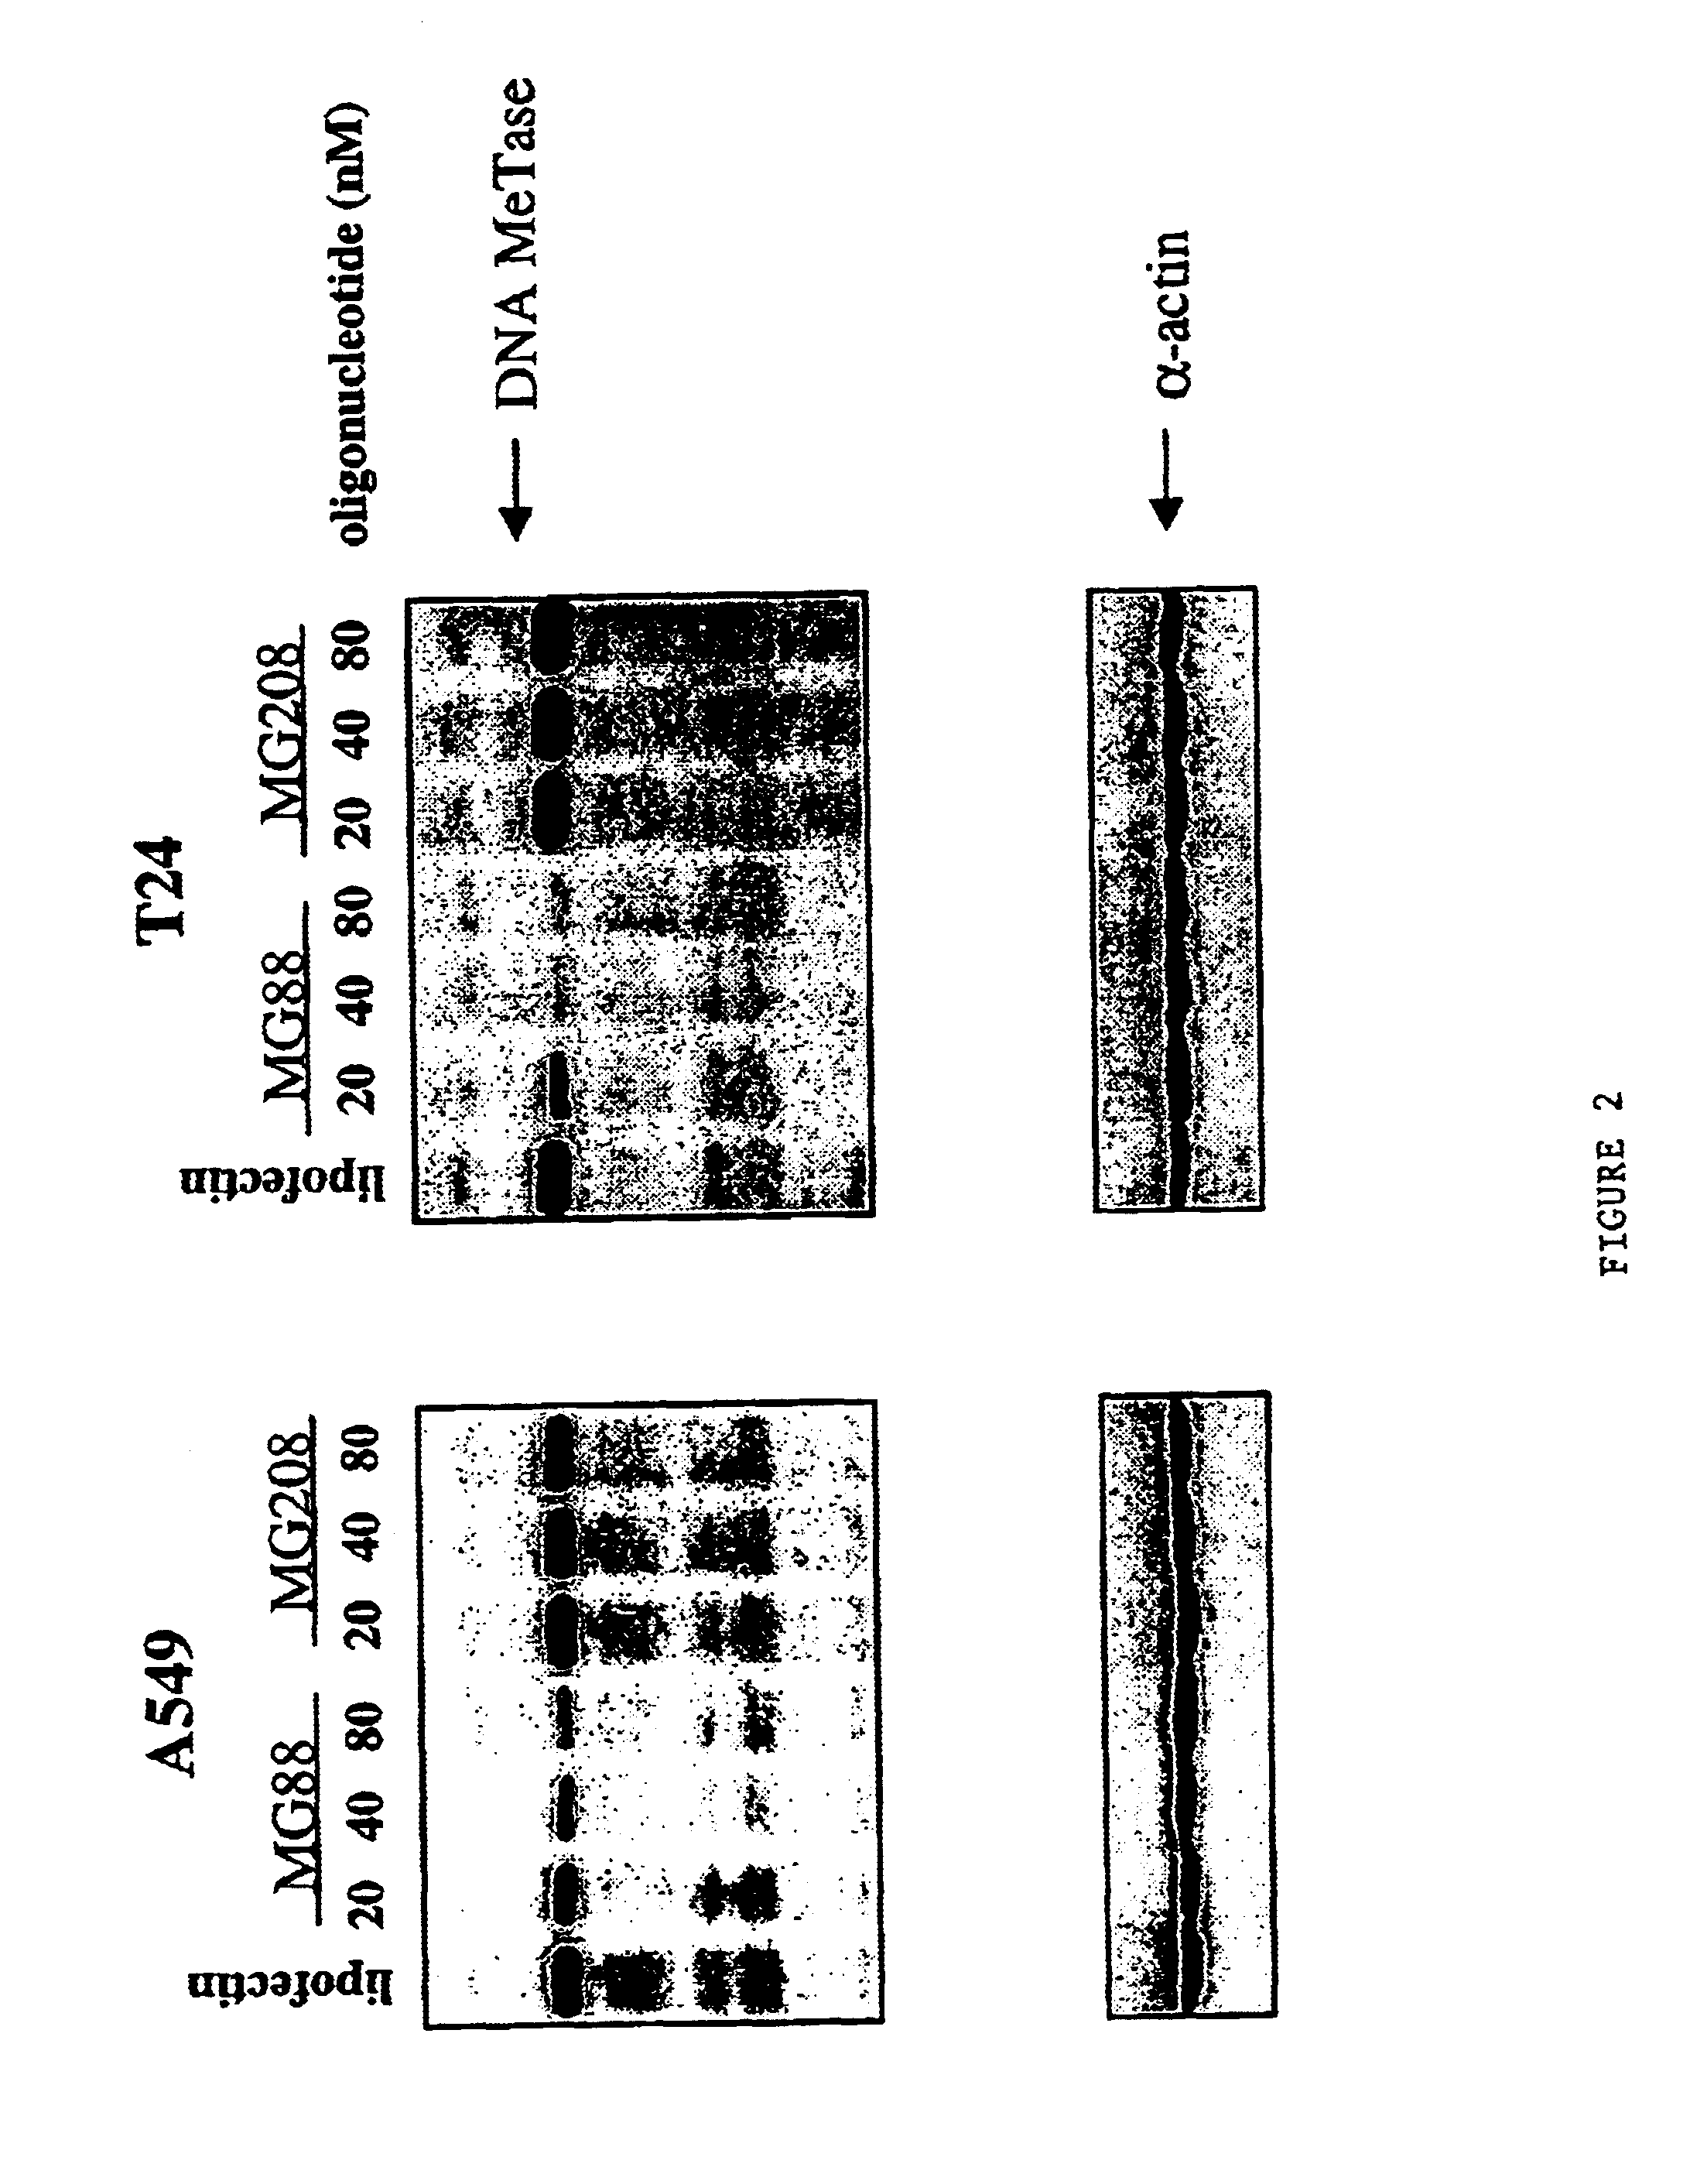 Modulation of gene expression by combination therapy